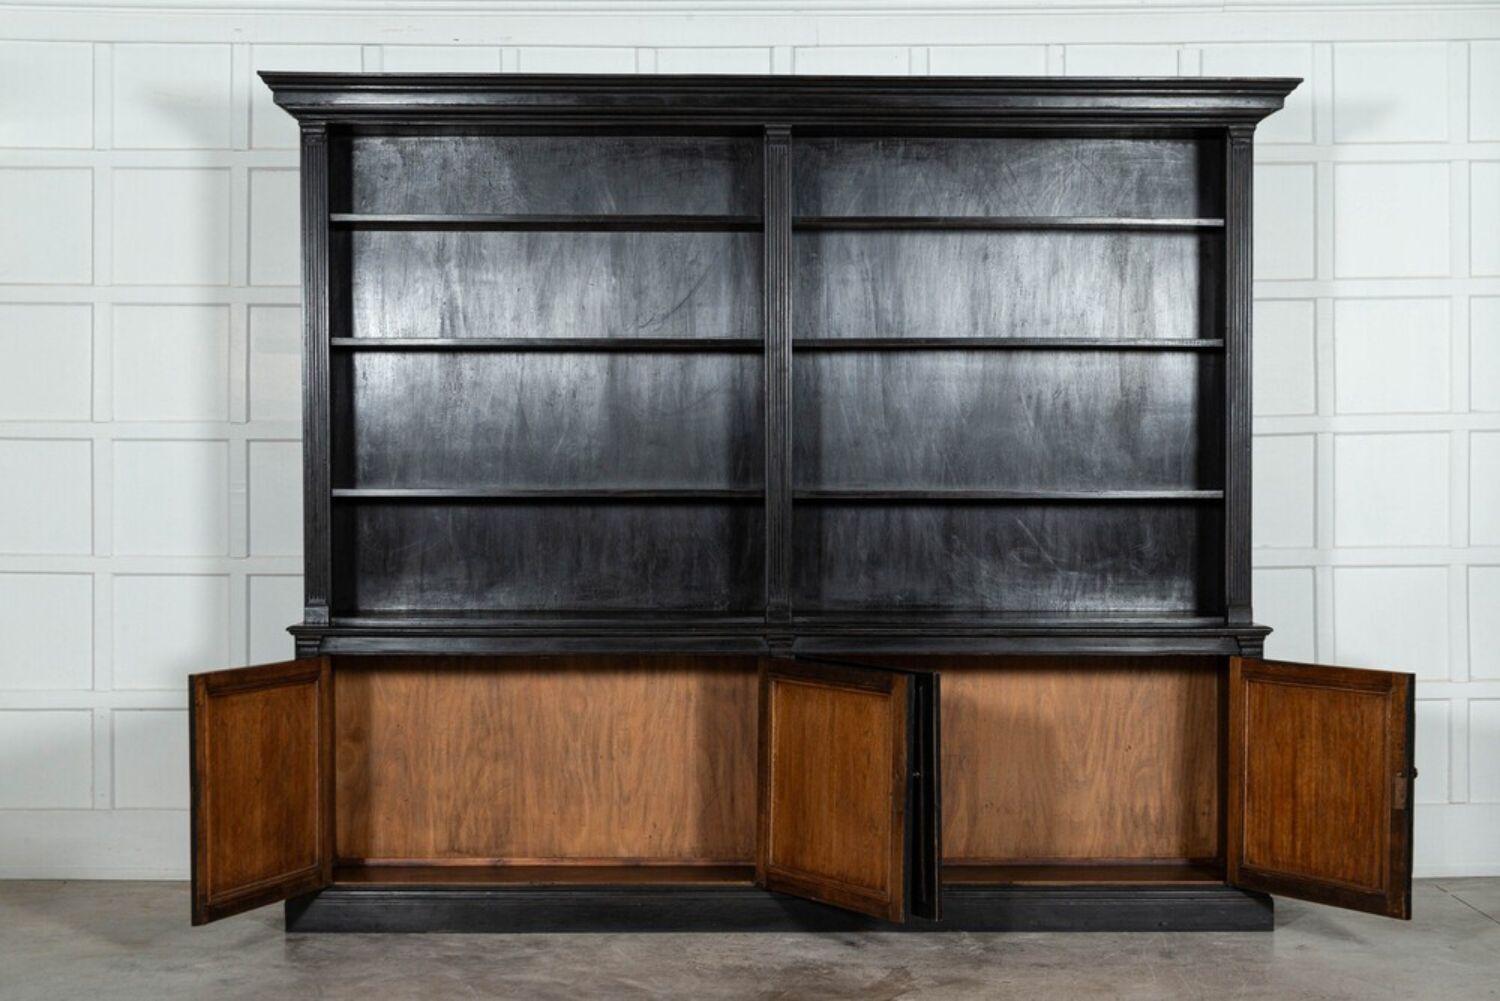 circa 1890
Monumental English Ebonised Oak Breakfront Bookcase
sku 1559
Provenance: By repute formerly owned by musician Nick Cave, purchased from his Brighton home.
Claveys Farmhouse, Mells Green, Somerset. England
Together W280 x D42 x H228